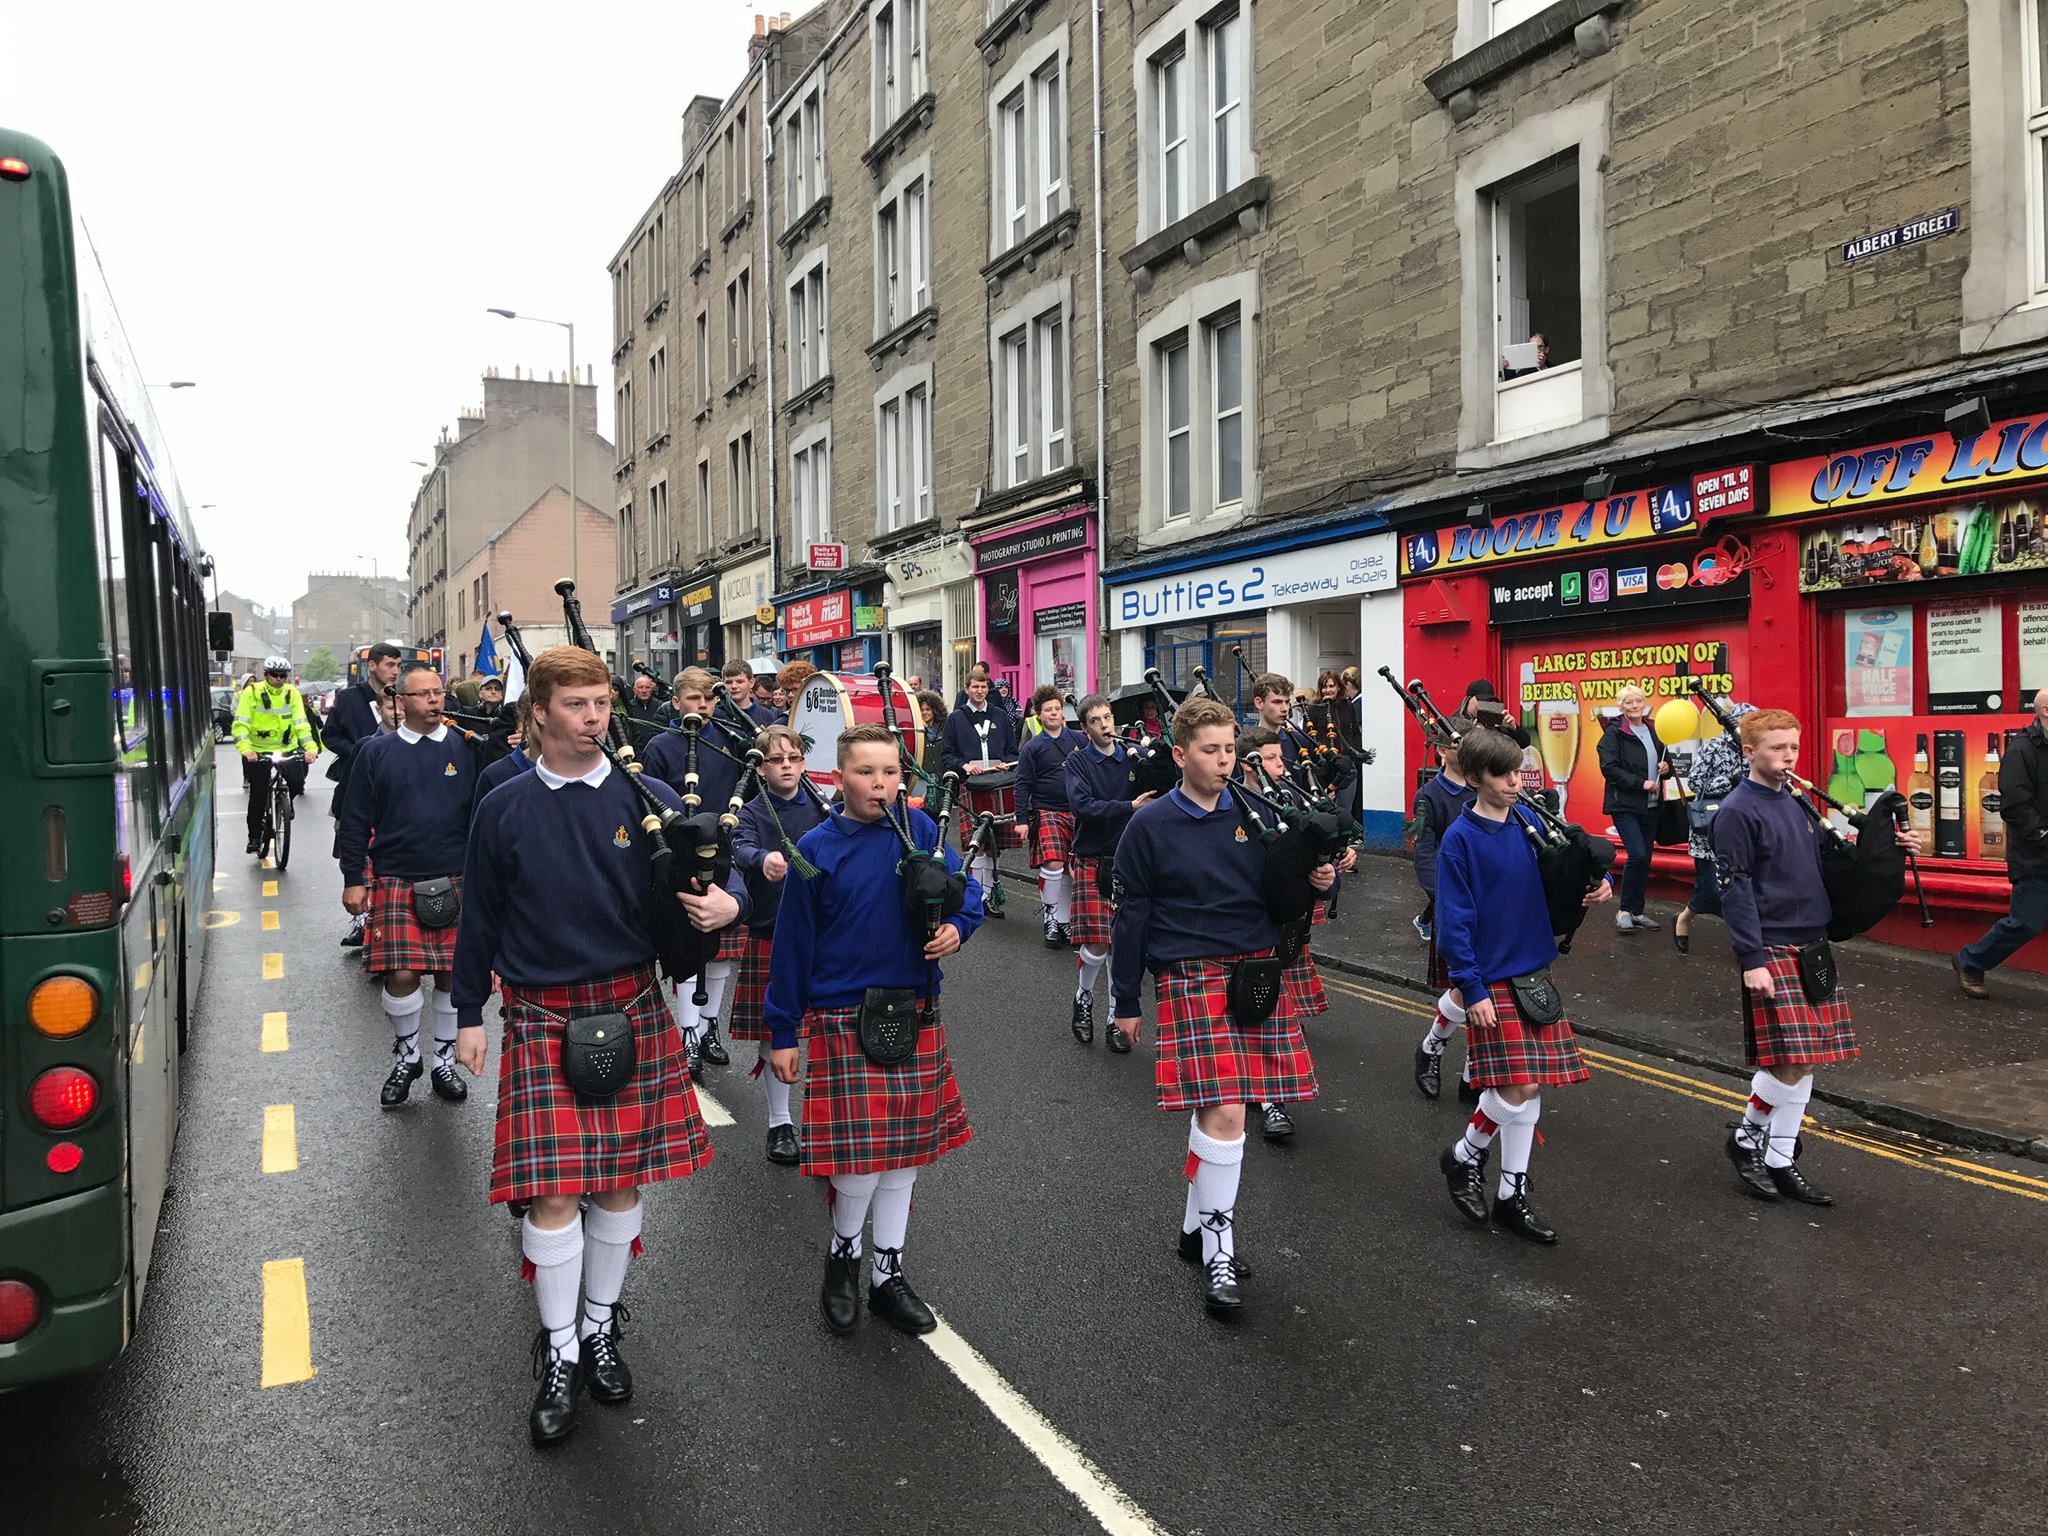 The pipe band parade during a previous Stobsfest Gala Day.